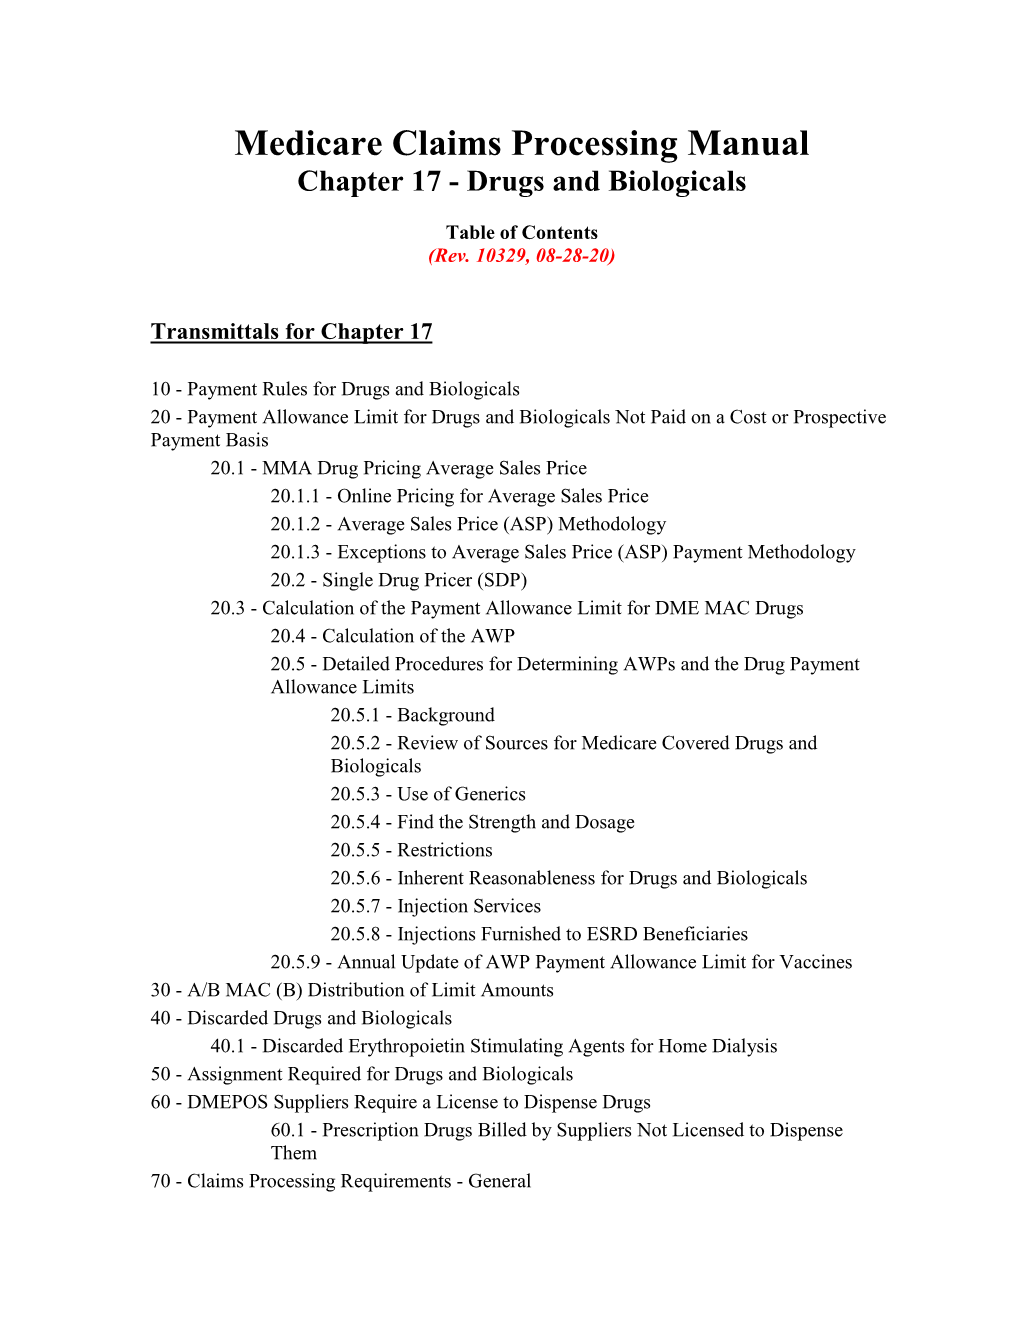 Medicare Claims Processing Manual Chapter 17 – Drugs and Biologicals